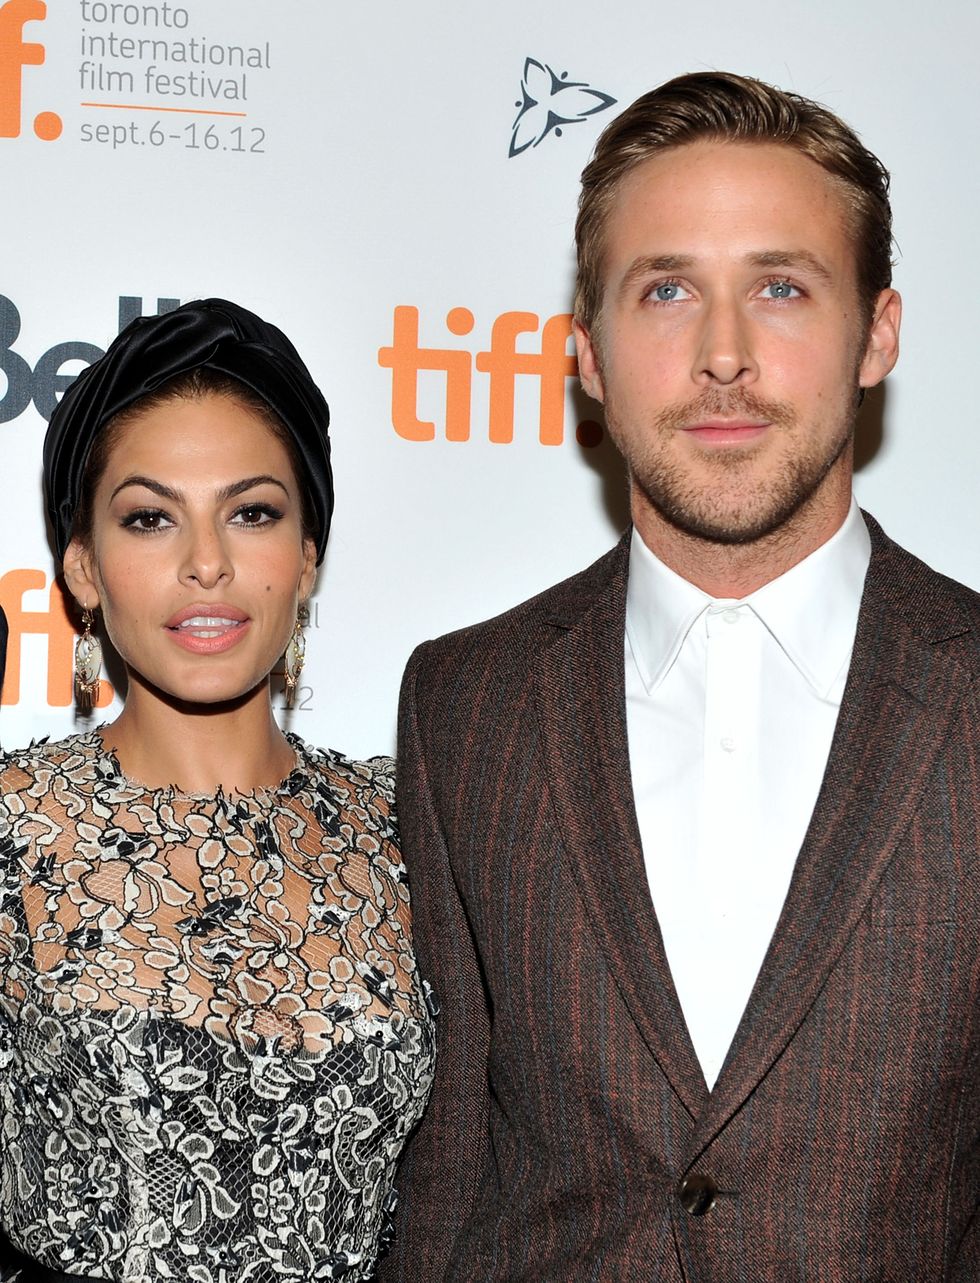 toronto, on september 07 actors eva mendes and ryan gosling attend the place beyond the pines premiere during the 2012 toronto international film festival at princess of wales theatre on september 7, 2012 in toronto, canada photo by sonia recchiagetty images